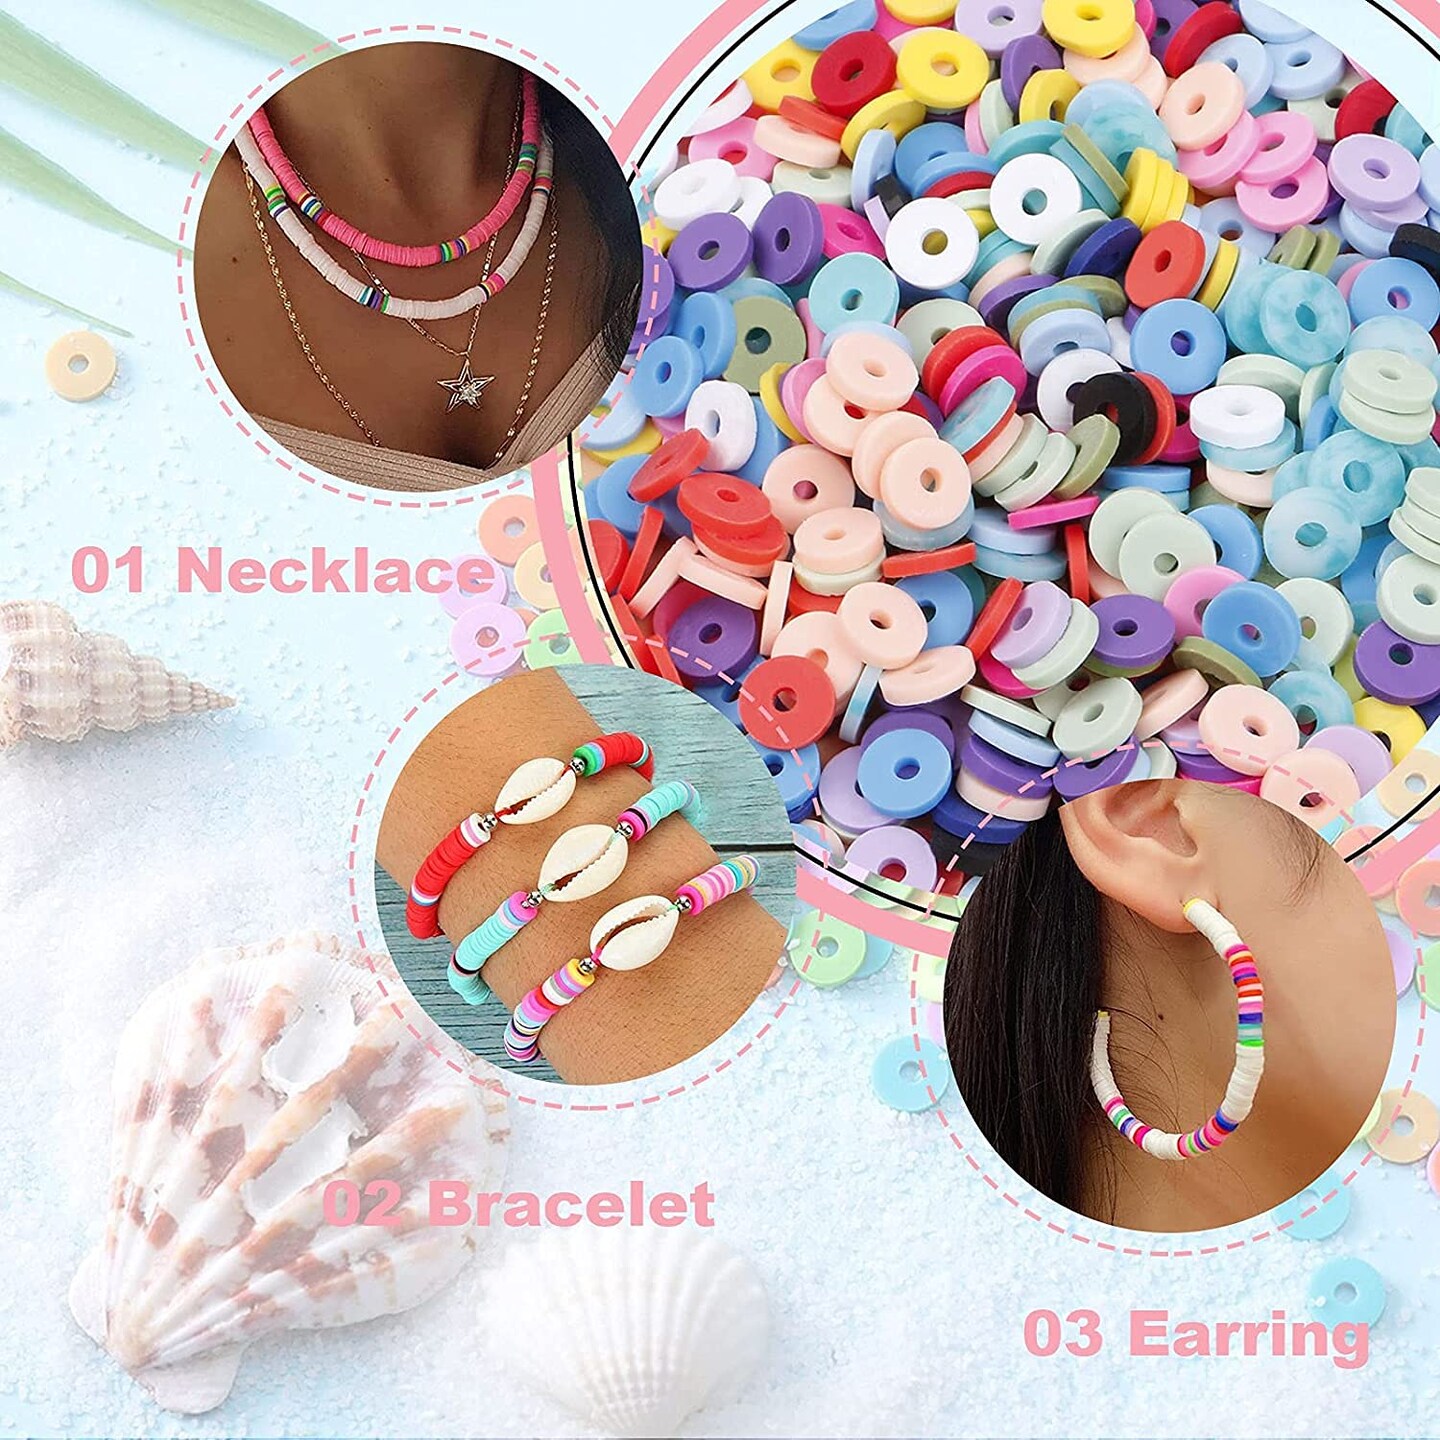 OPPRYN 6000 Pcs 24 Colors 6mm Polymer Clay Beads,Bracelet Making Kit,Preppy Flat Spacer Heishi Beads for Jewelry Making with Smiley Face Beads Letter Beads Pendant Charms kit,Gifts/DIY